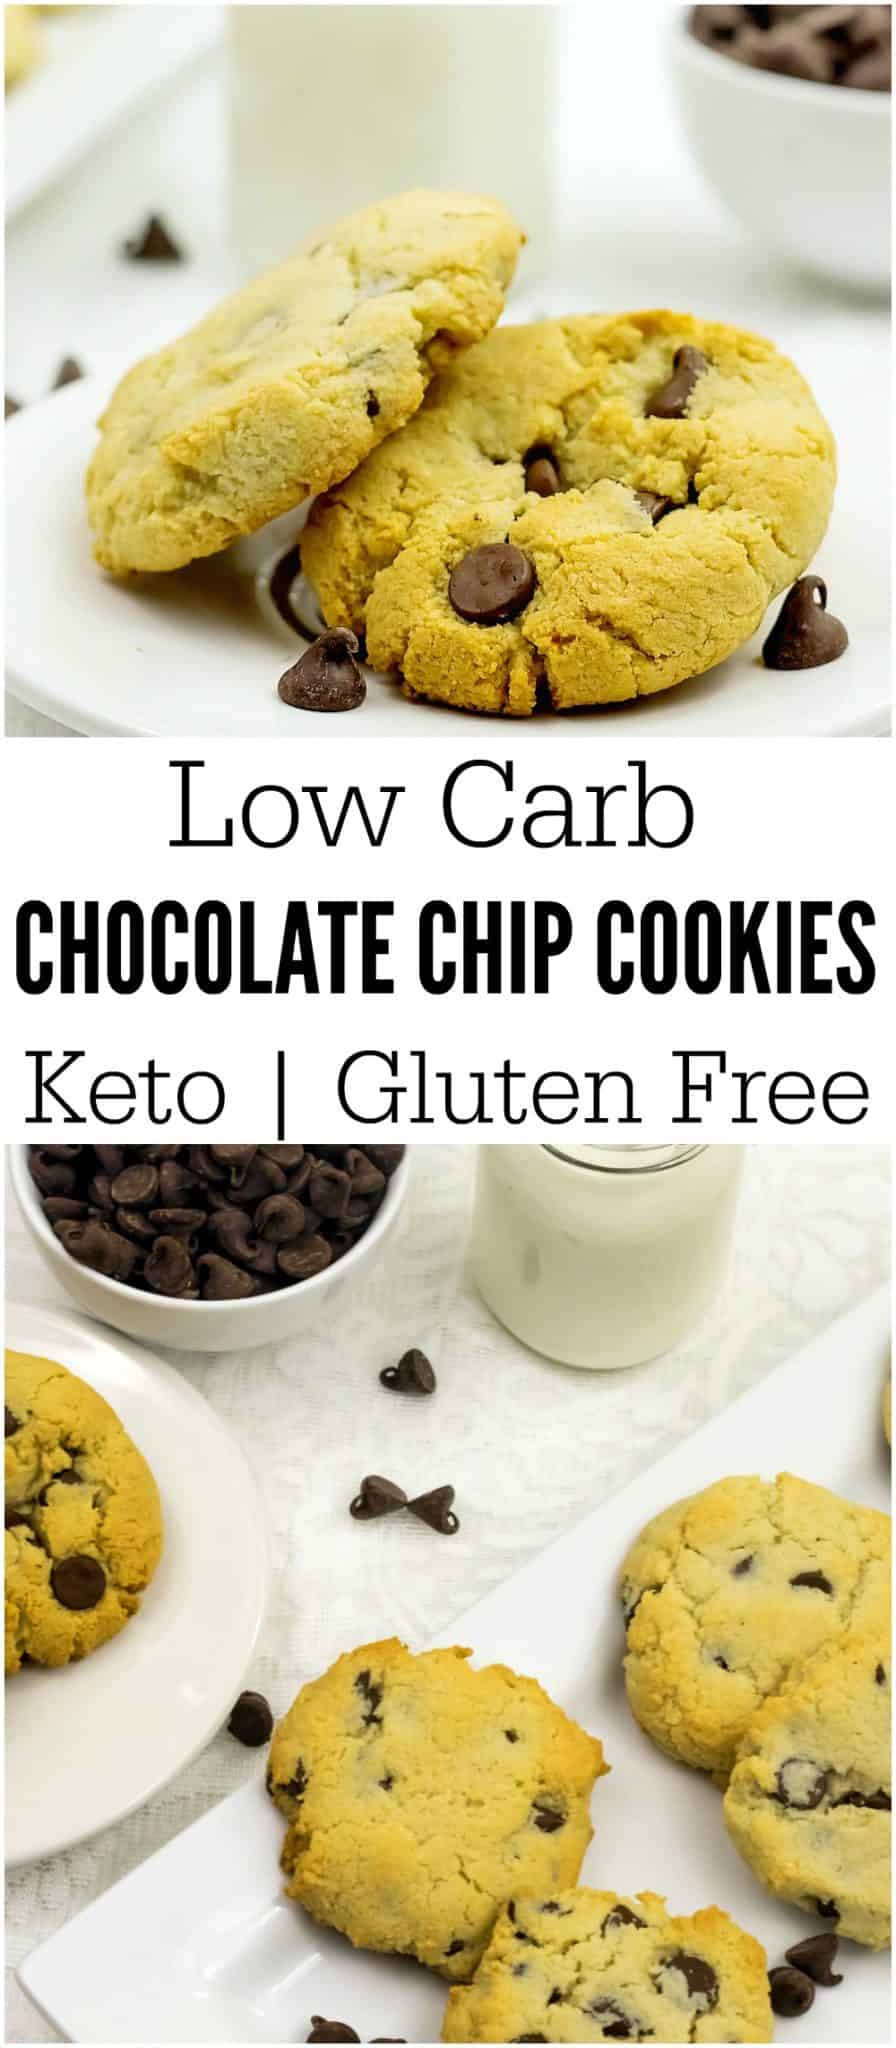 LOW CARB CHOCOLATE CHIP COOKIE RECIPE